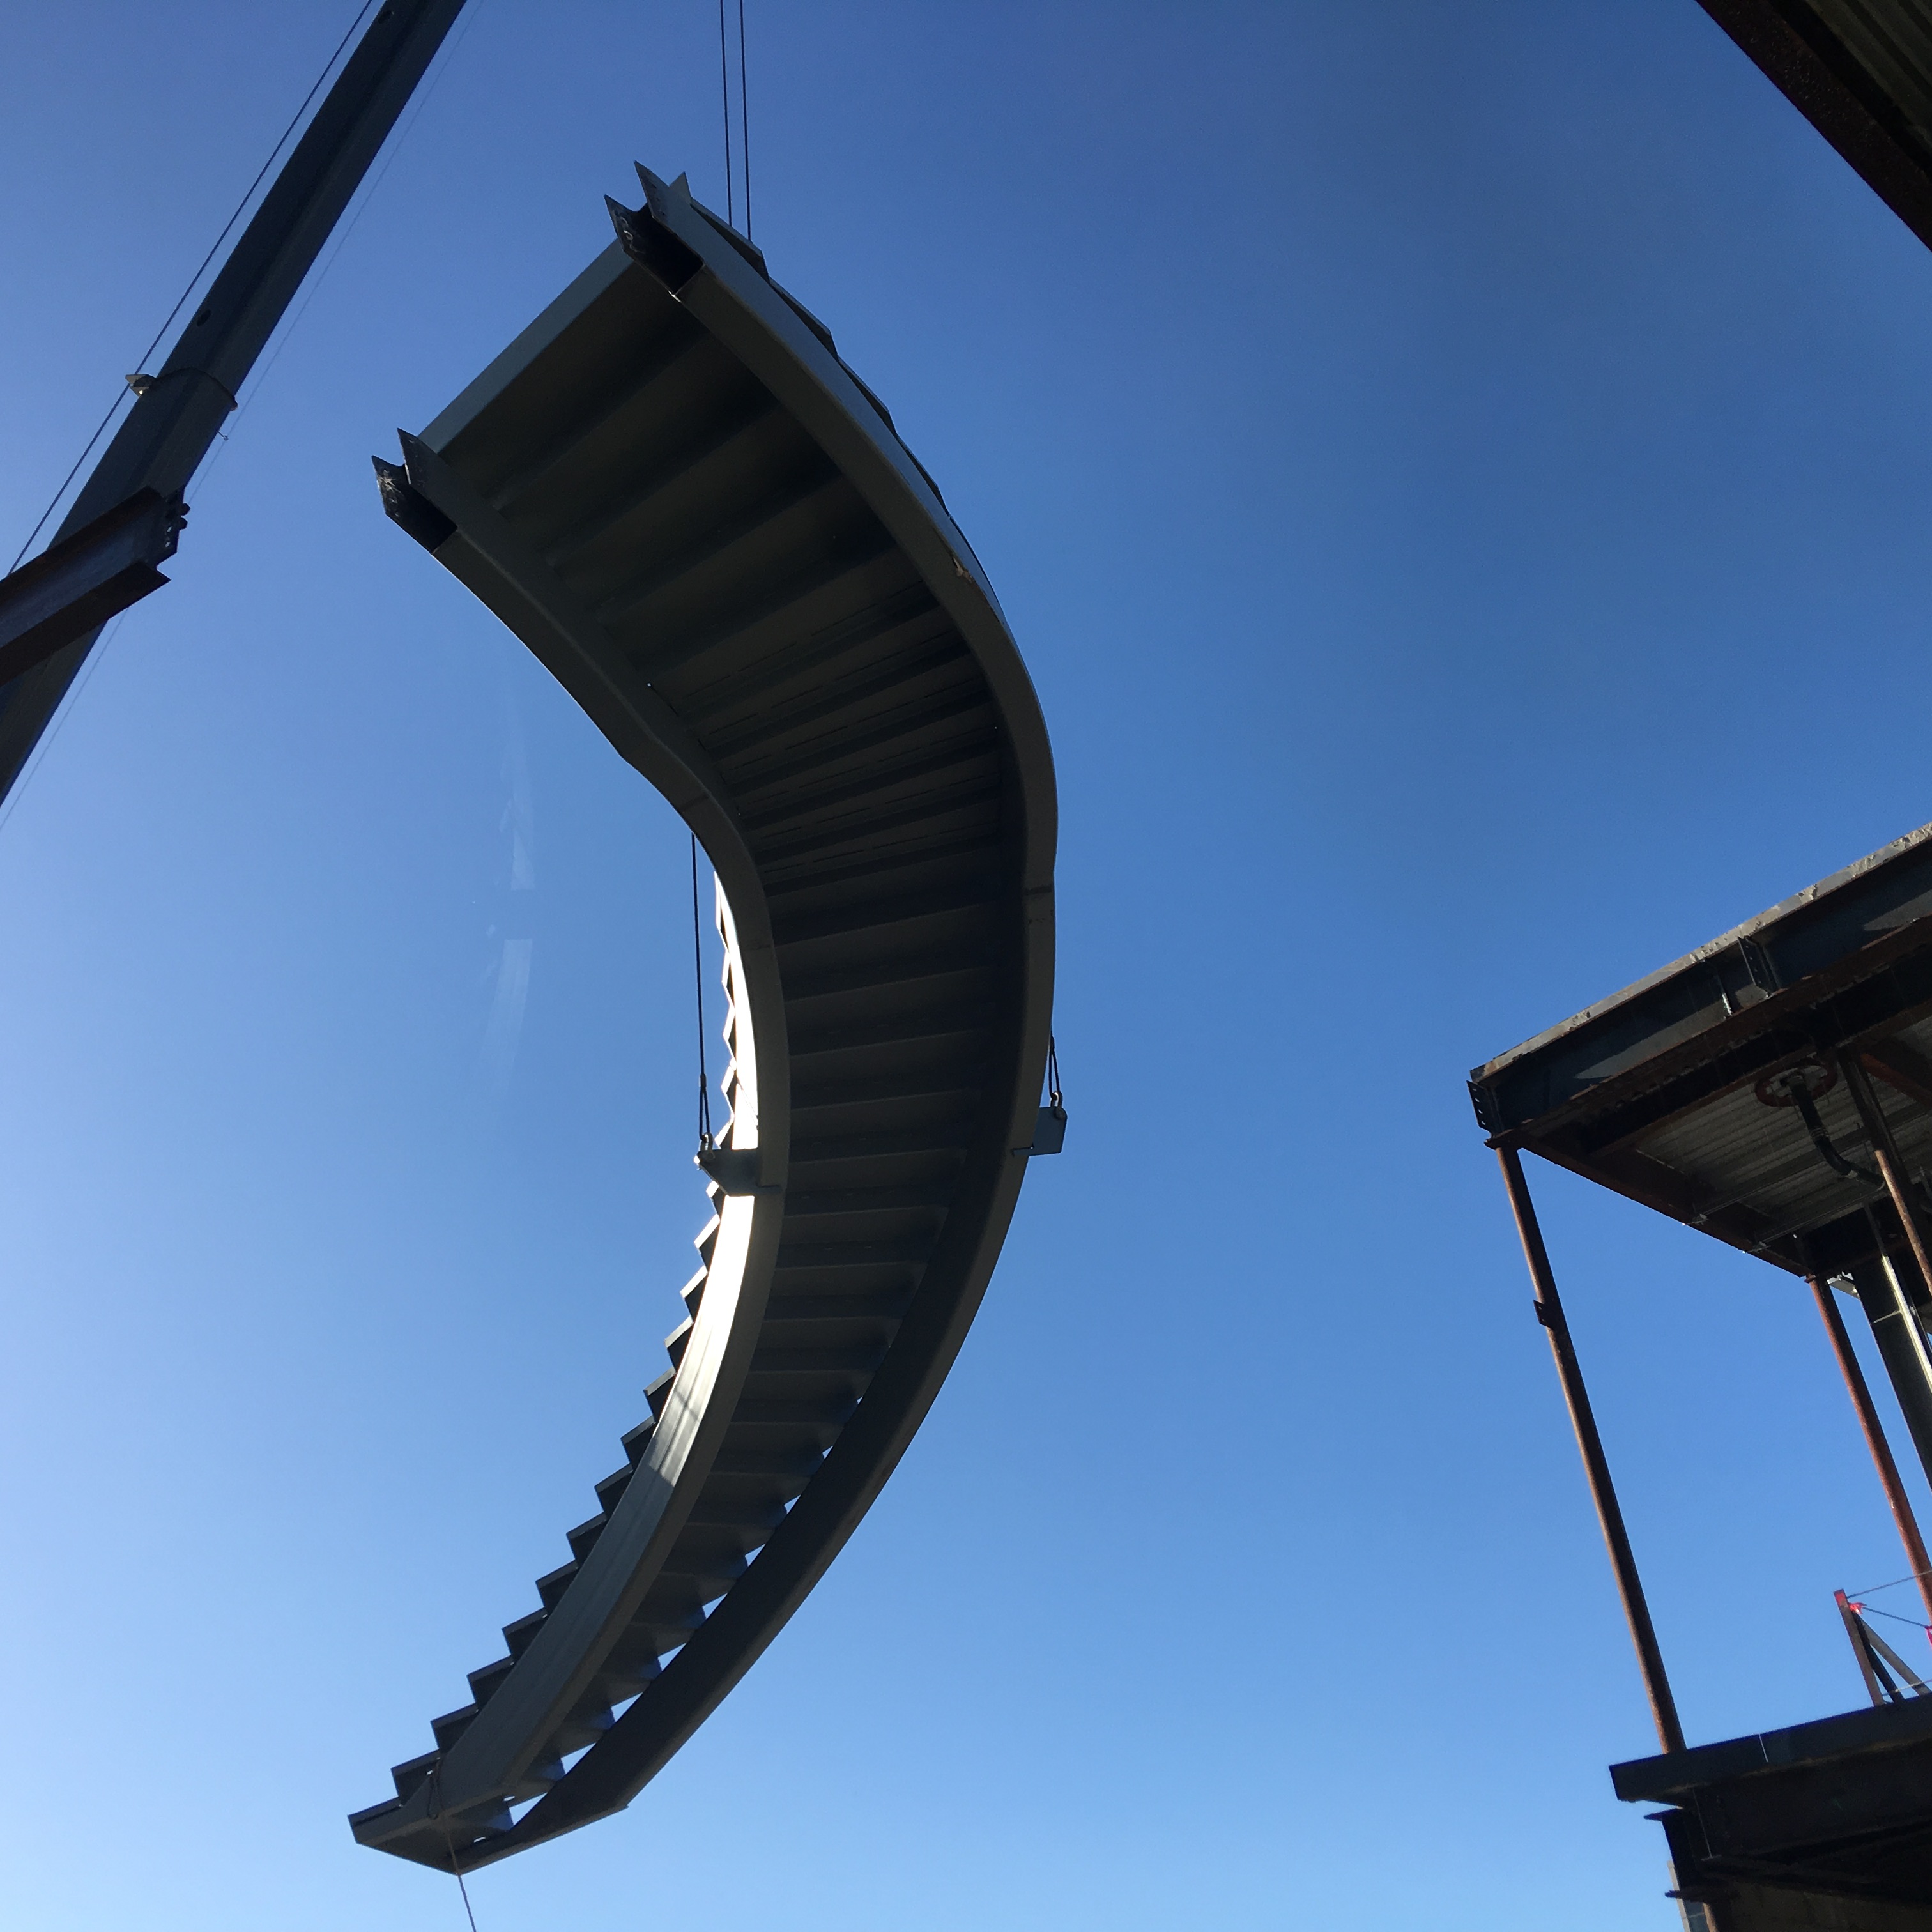 Spiral Staircase Being Lowered by Crane